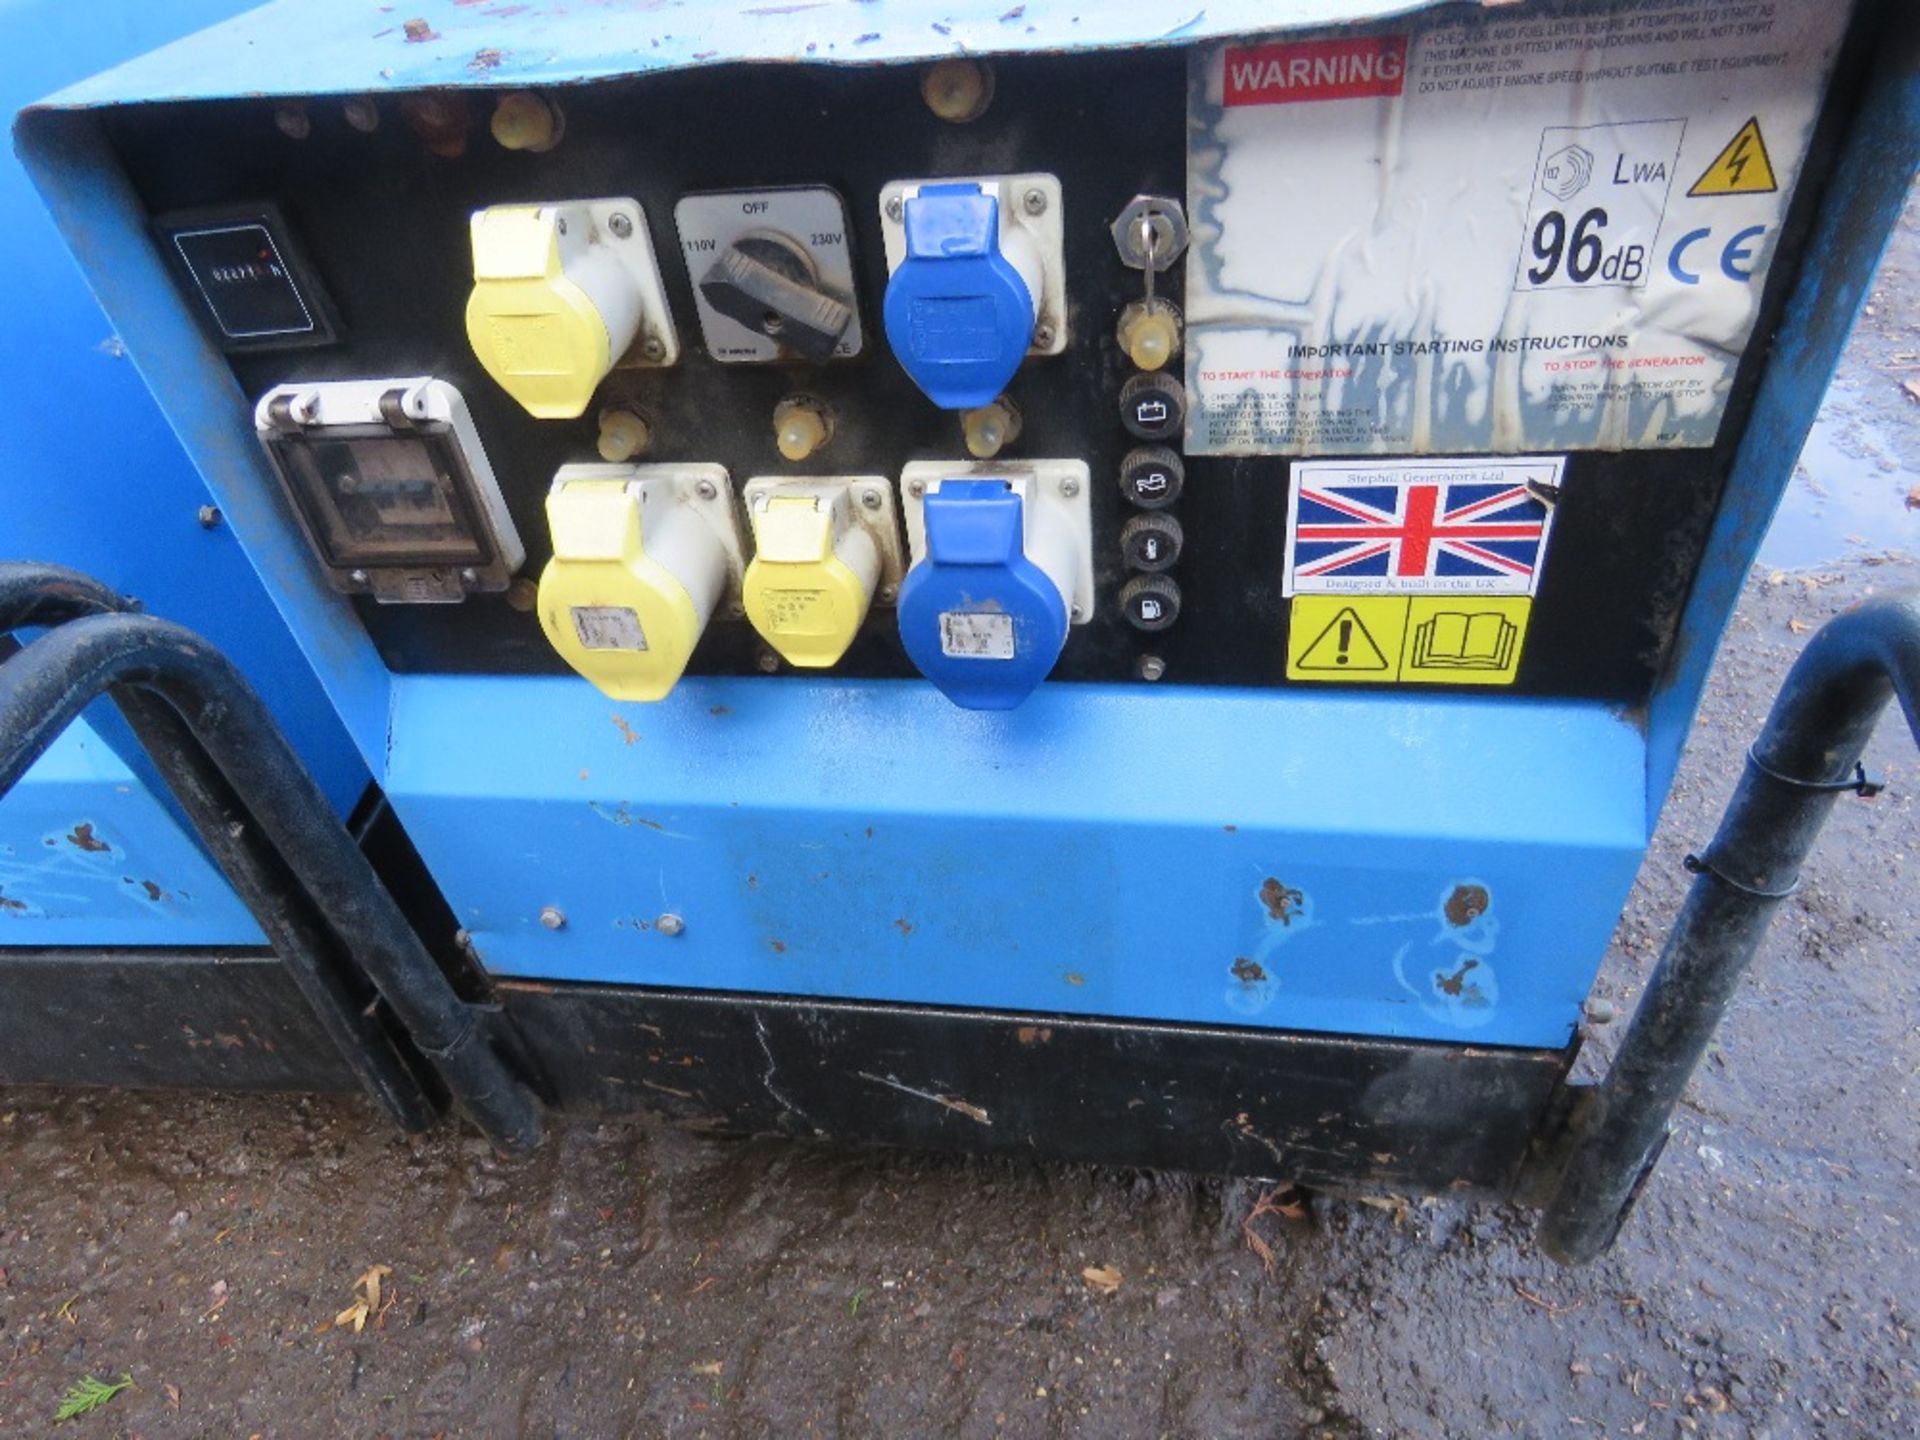 STEPHILL 6KVA BARROW GENERATOR. WHEN TESTED WAS SEEN TO RUN AND MAKE POWER. - Image 2 of 4